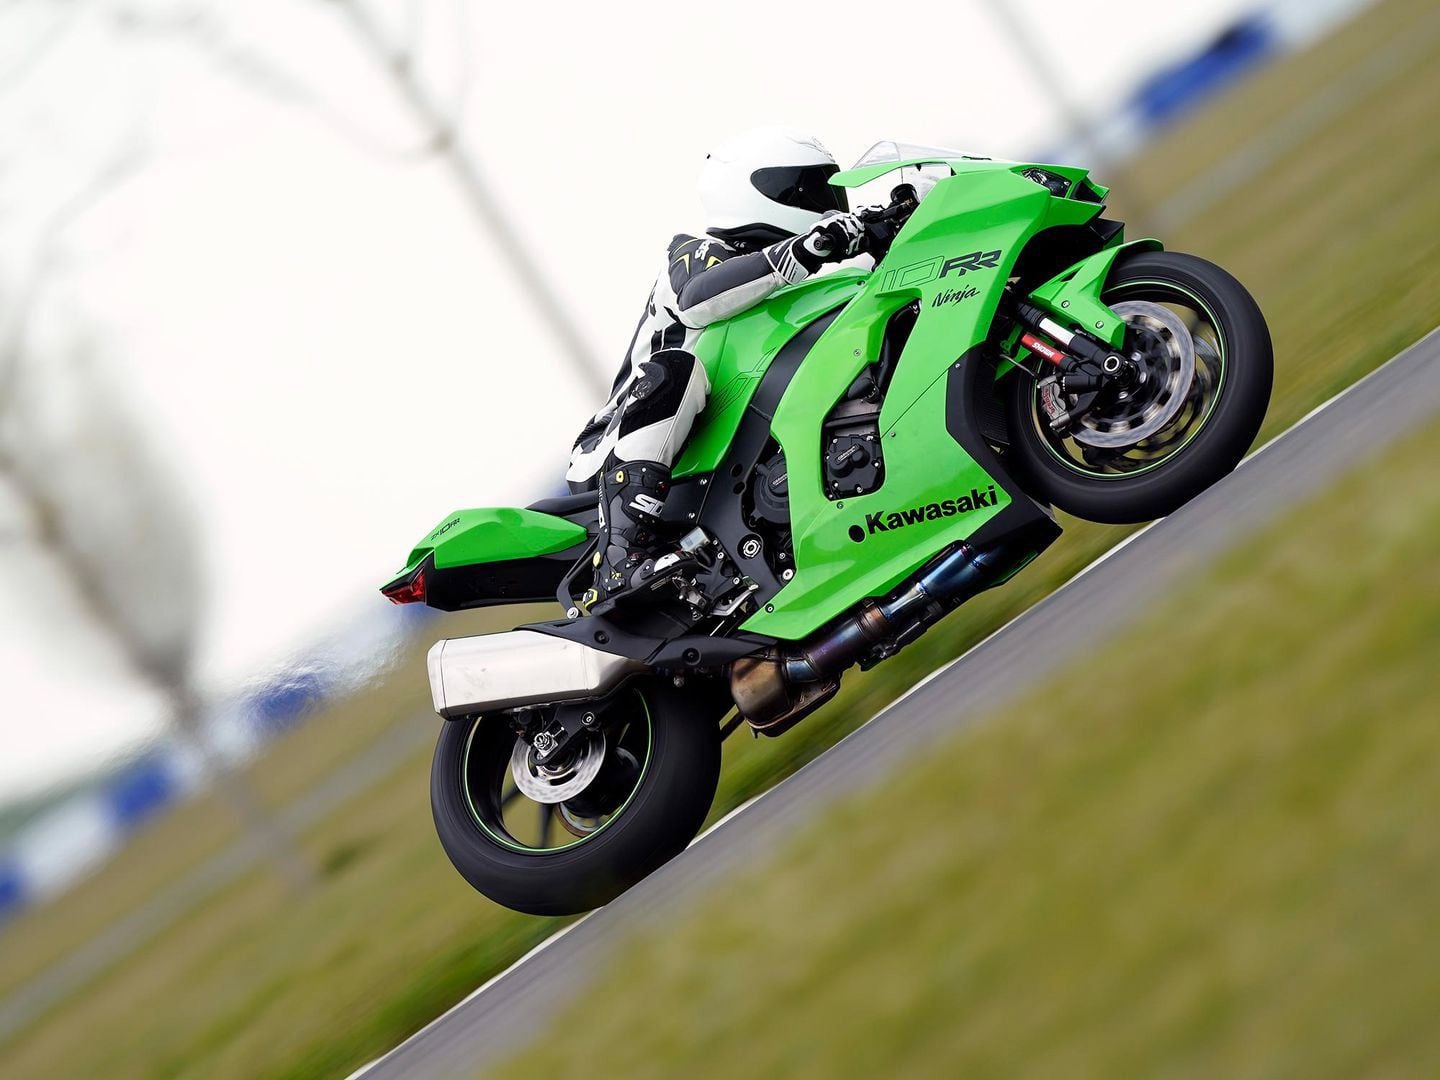 While the ZX-10RR has just 1 peak horsepower more than the ZX-10R, it feels more like 10 thanks to a quicker-revving engine and high redline.